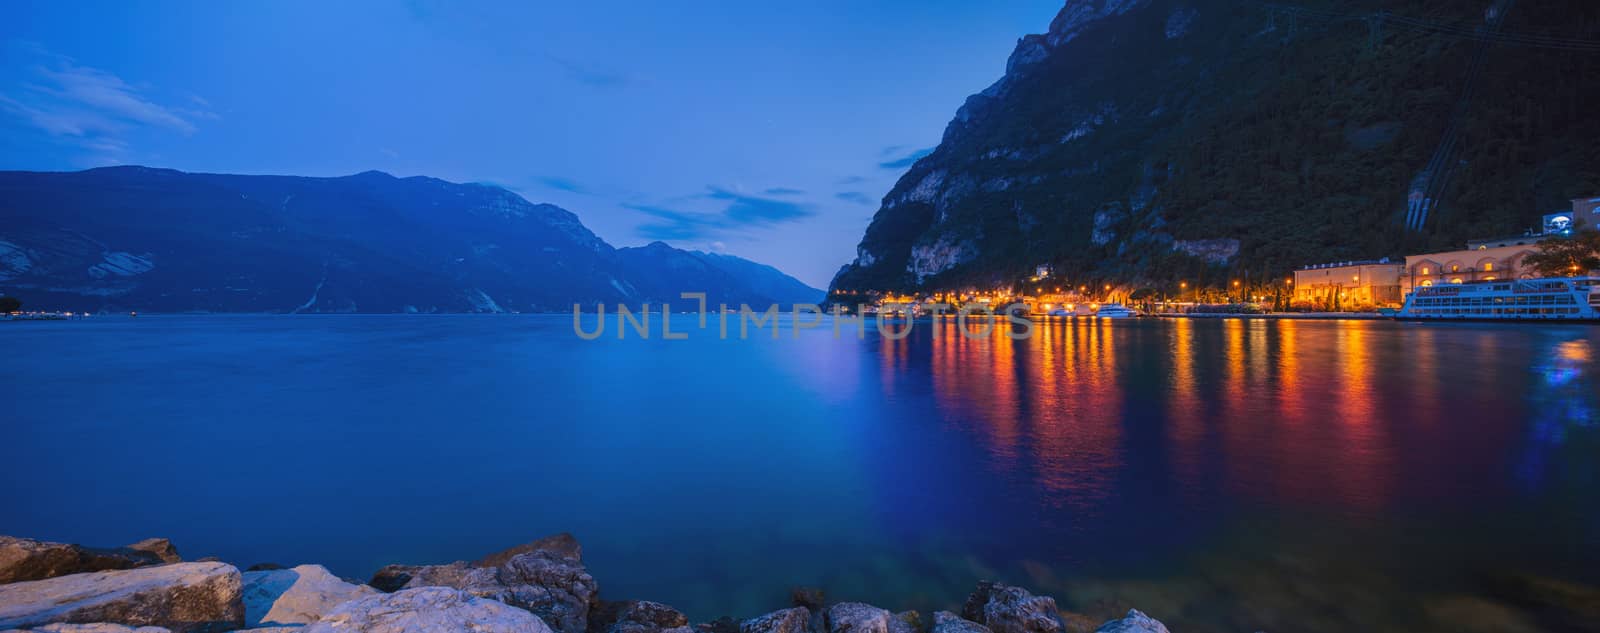 Riva del Garda, Lake Garda, Italy, August 2019, A view of the lake and town